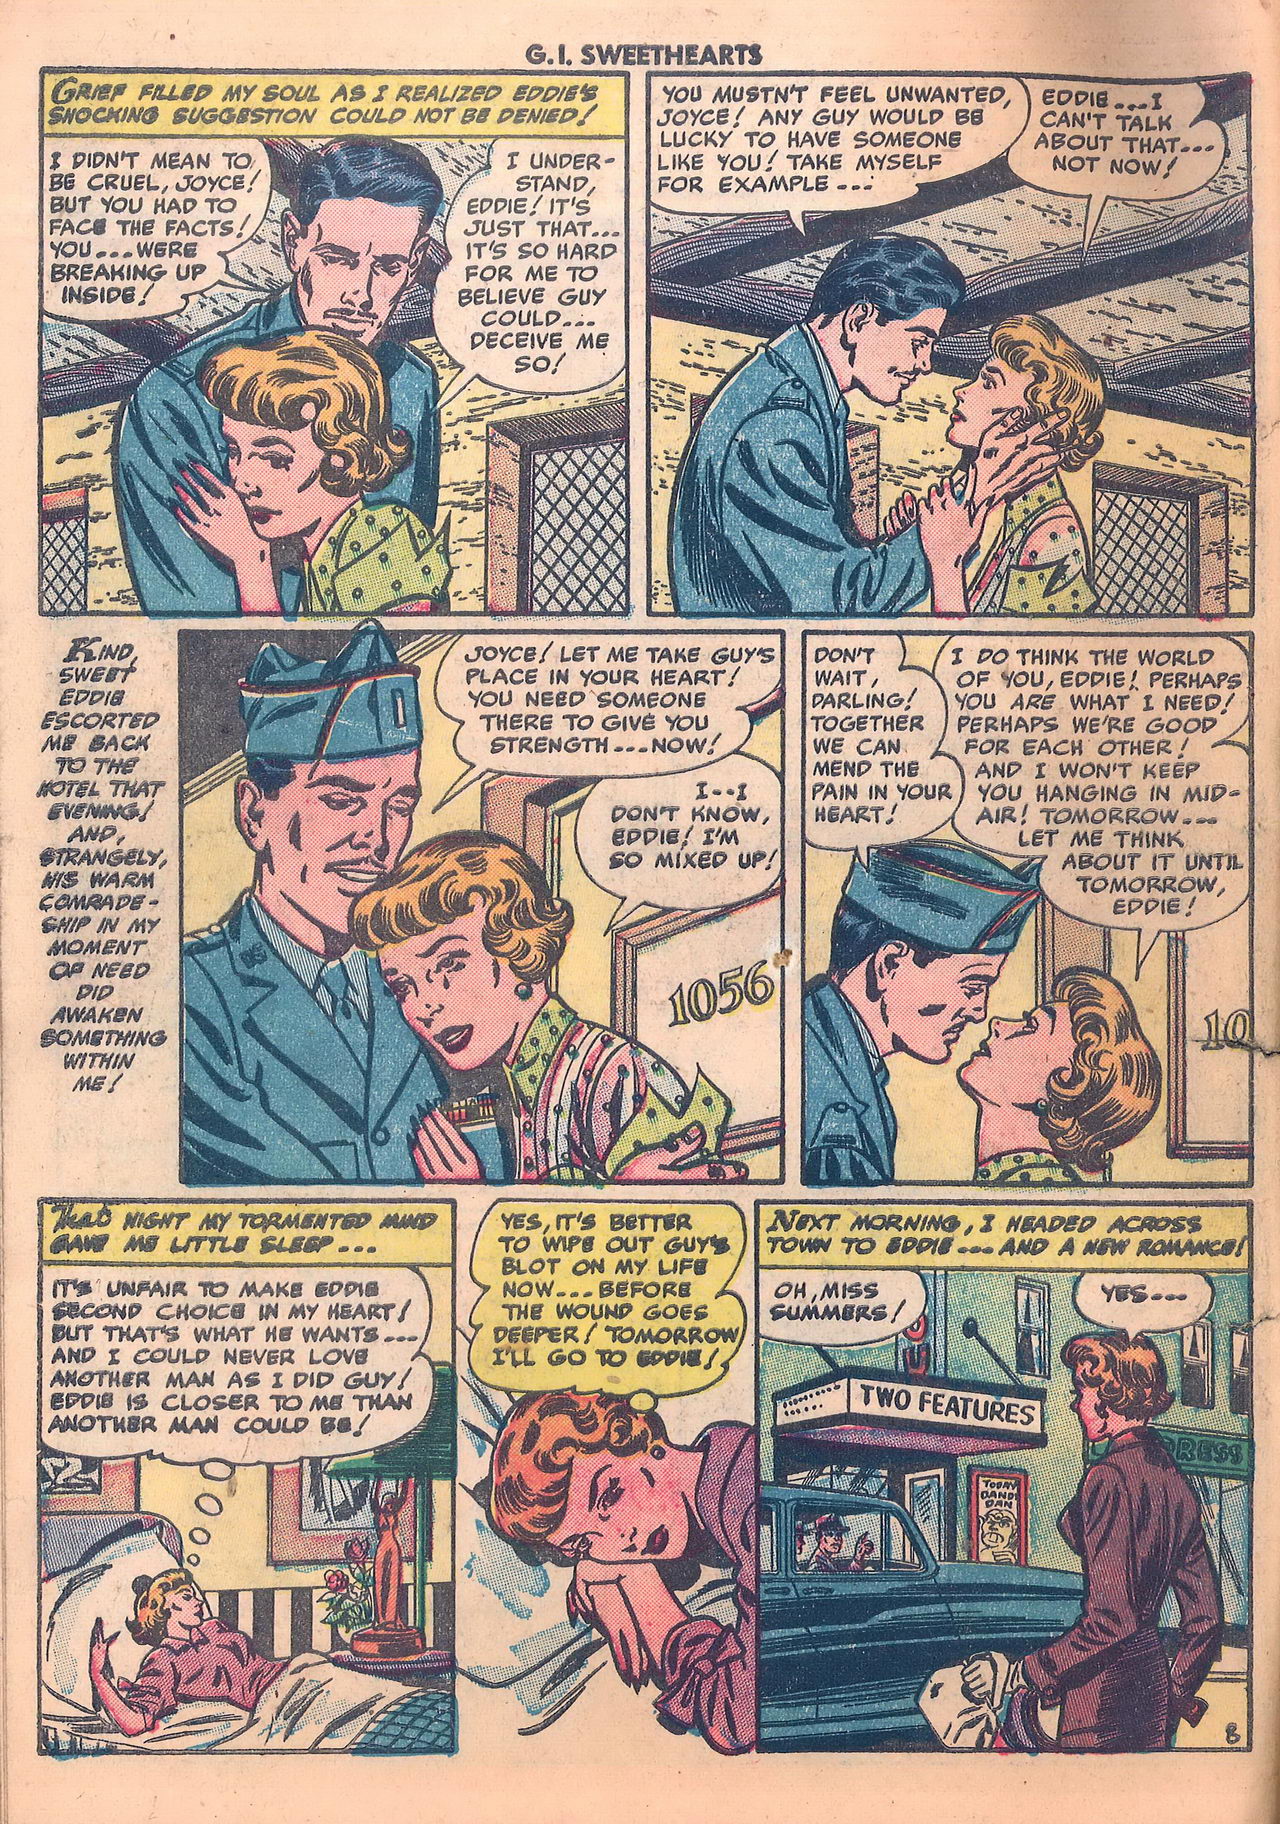 Read online G.I. Sweethearts comic -  Issue #36 - 10